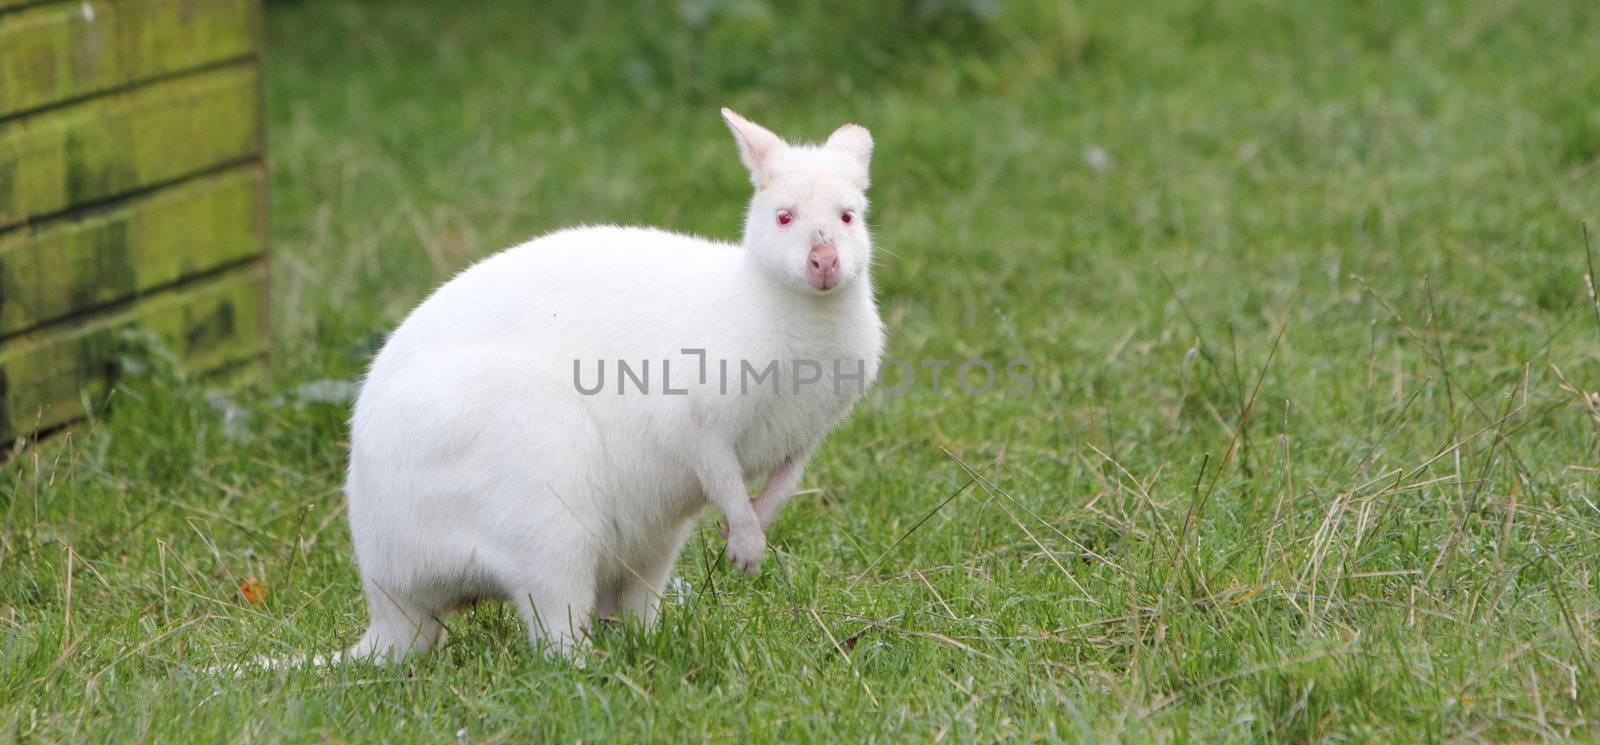 Albino wallaby by mitzy